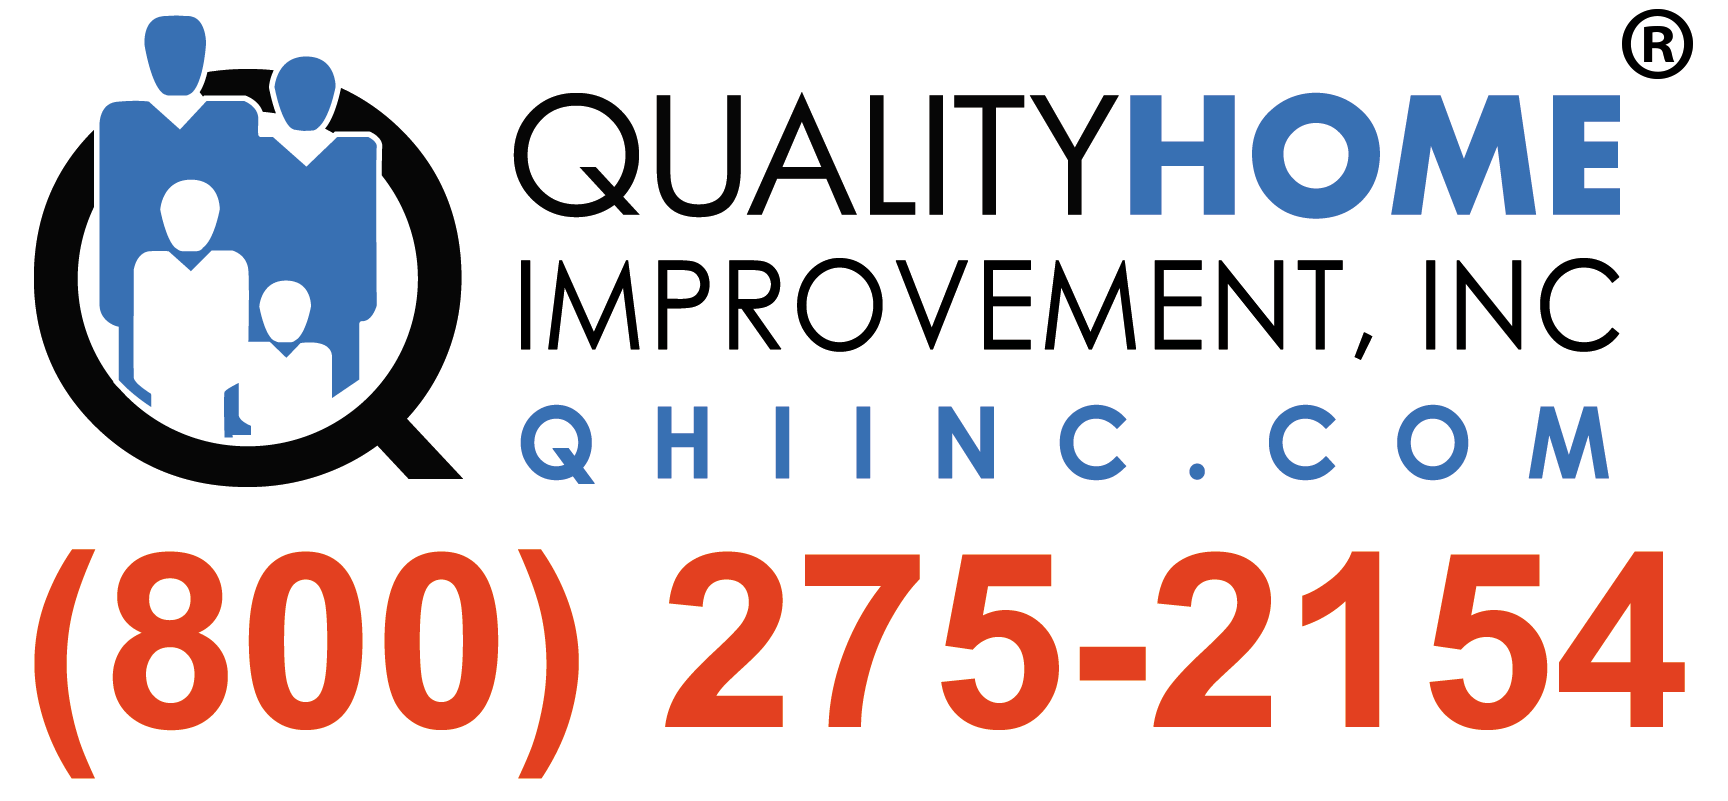 General Contractor Upland CA | Quality Home Improvement, Inc